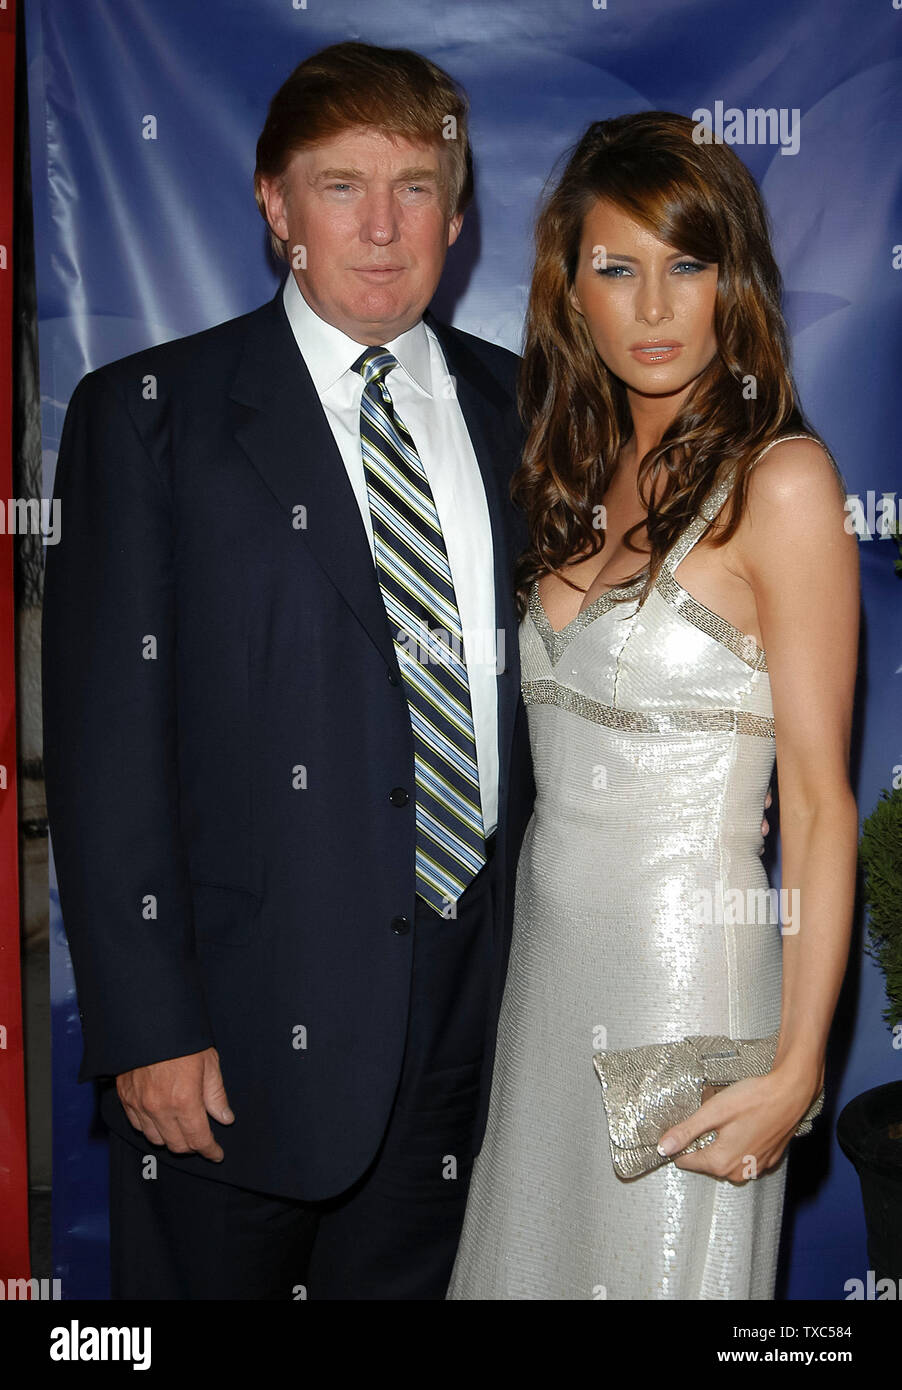 Melania Knauss High Resolution Stock Photography and Images - Alamy